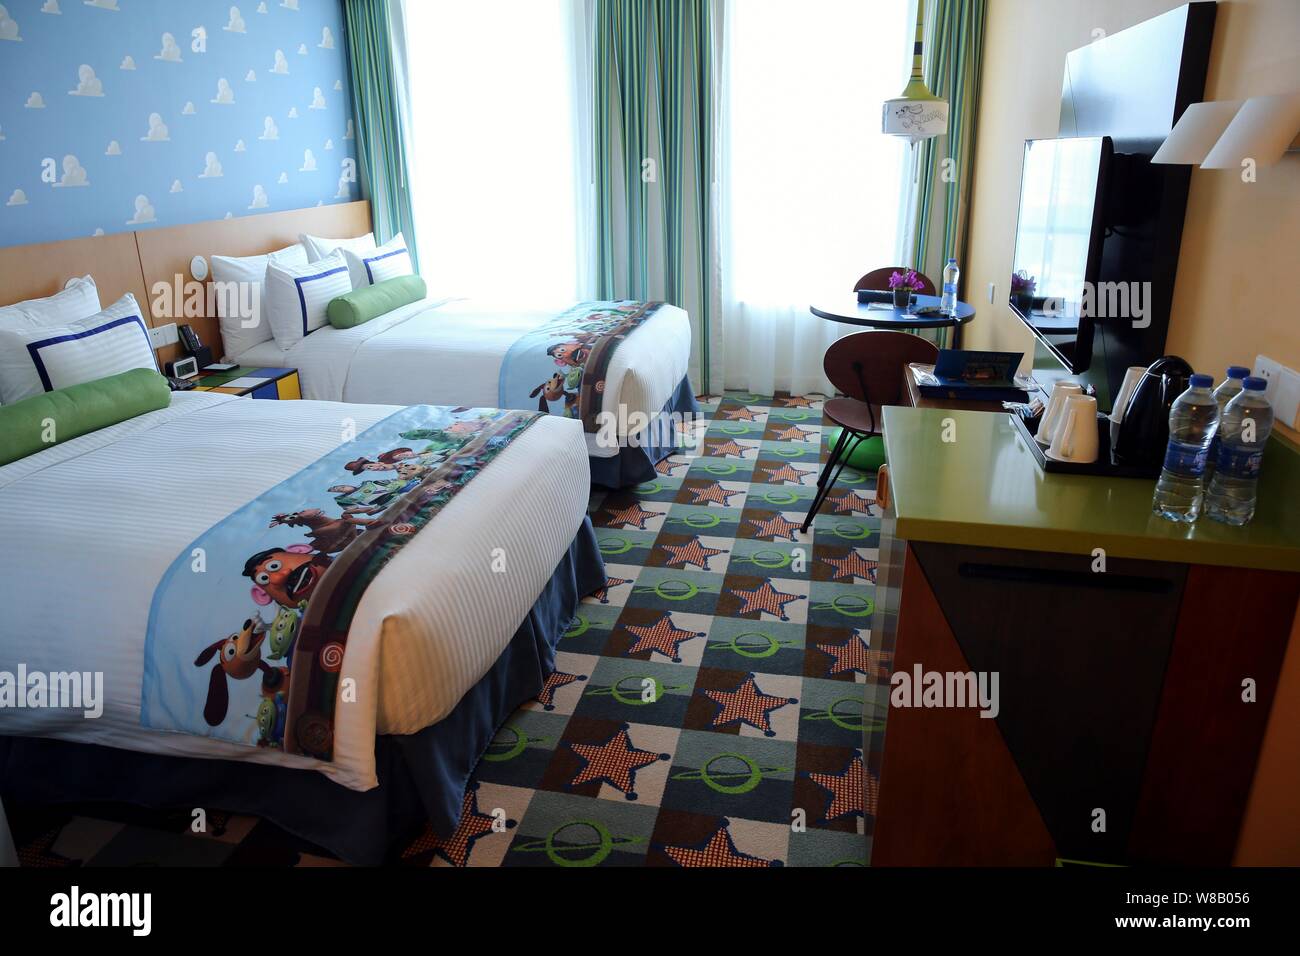 Interior Of A Suite In The Toy Story Hotel At The Shanghai Disney Resort In Pudong Shanghai China 14 June 16 The Shanghai Disneyland Hotel And Stock Photo Alamy